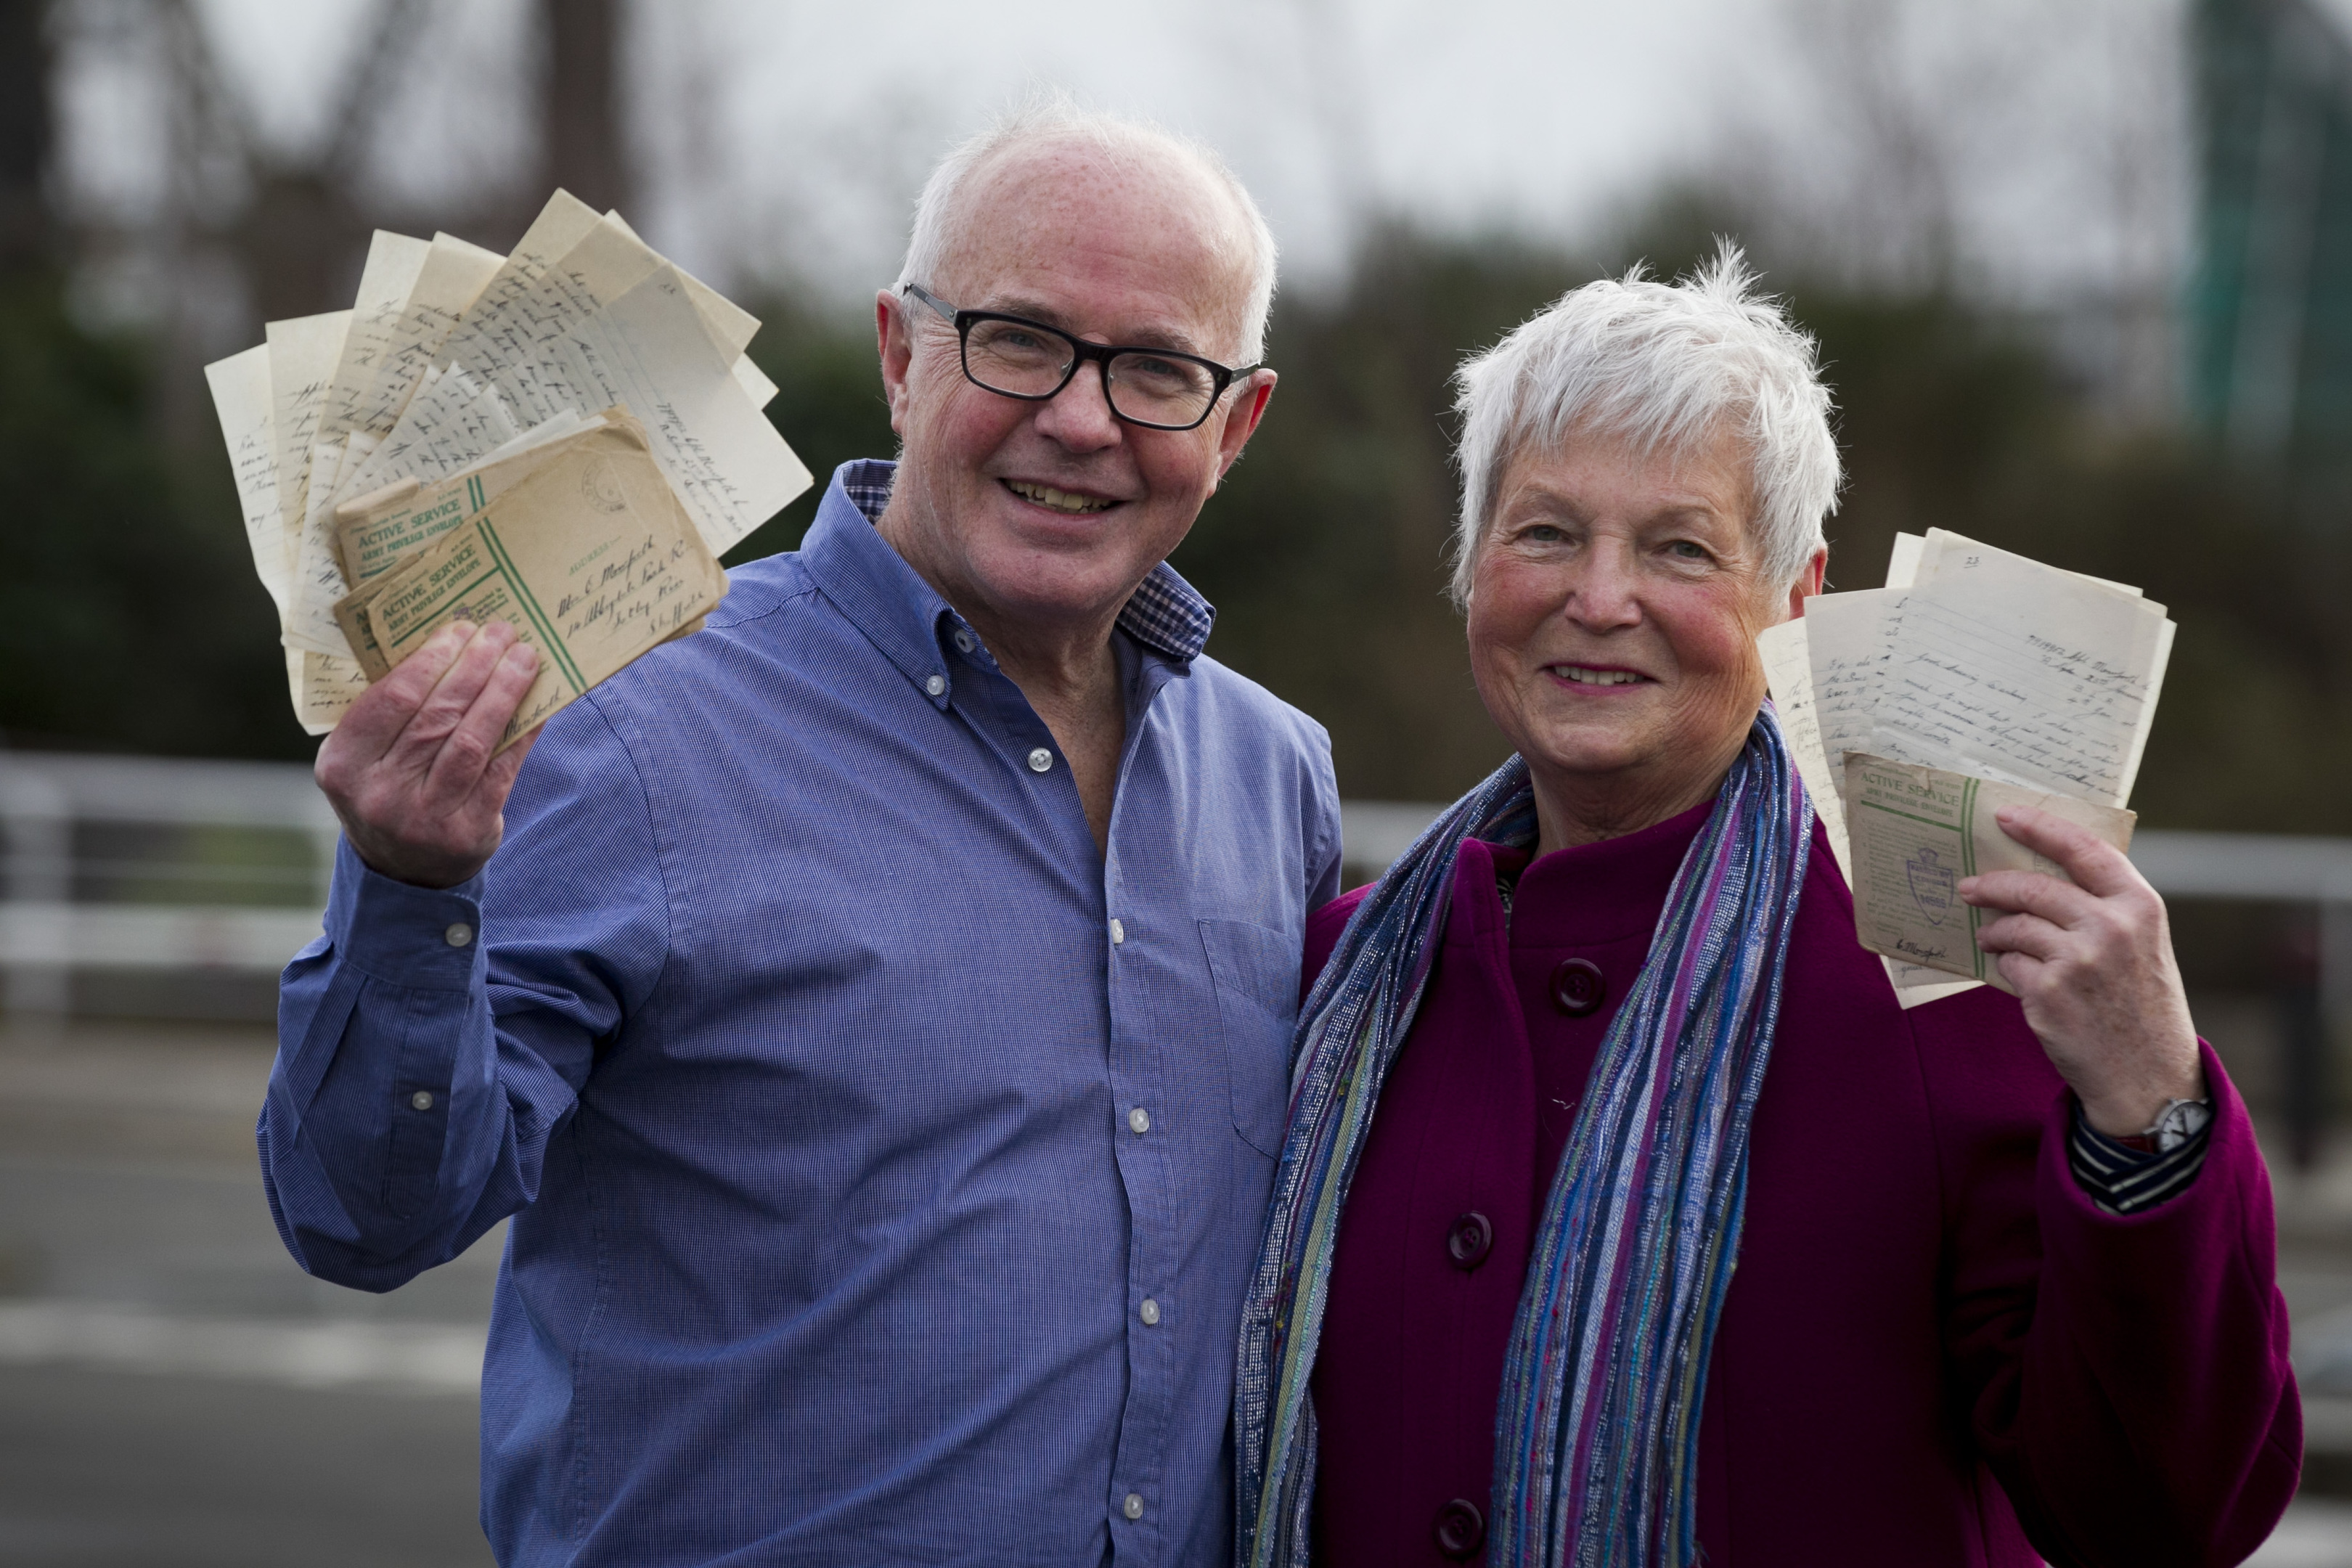 Brother and sister, Peter and Sue Mowforth, who have made up a book of love letters they found between their parents, Olga and Cyril, which were written while Cyril, was away fighting during WWII (Andrew Cawley)